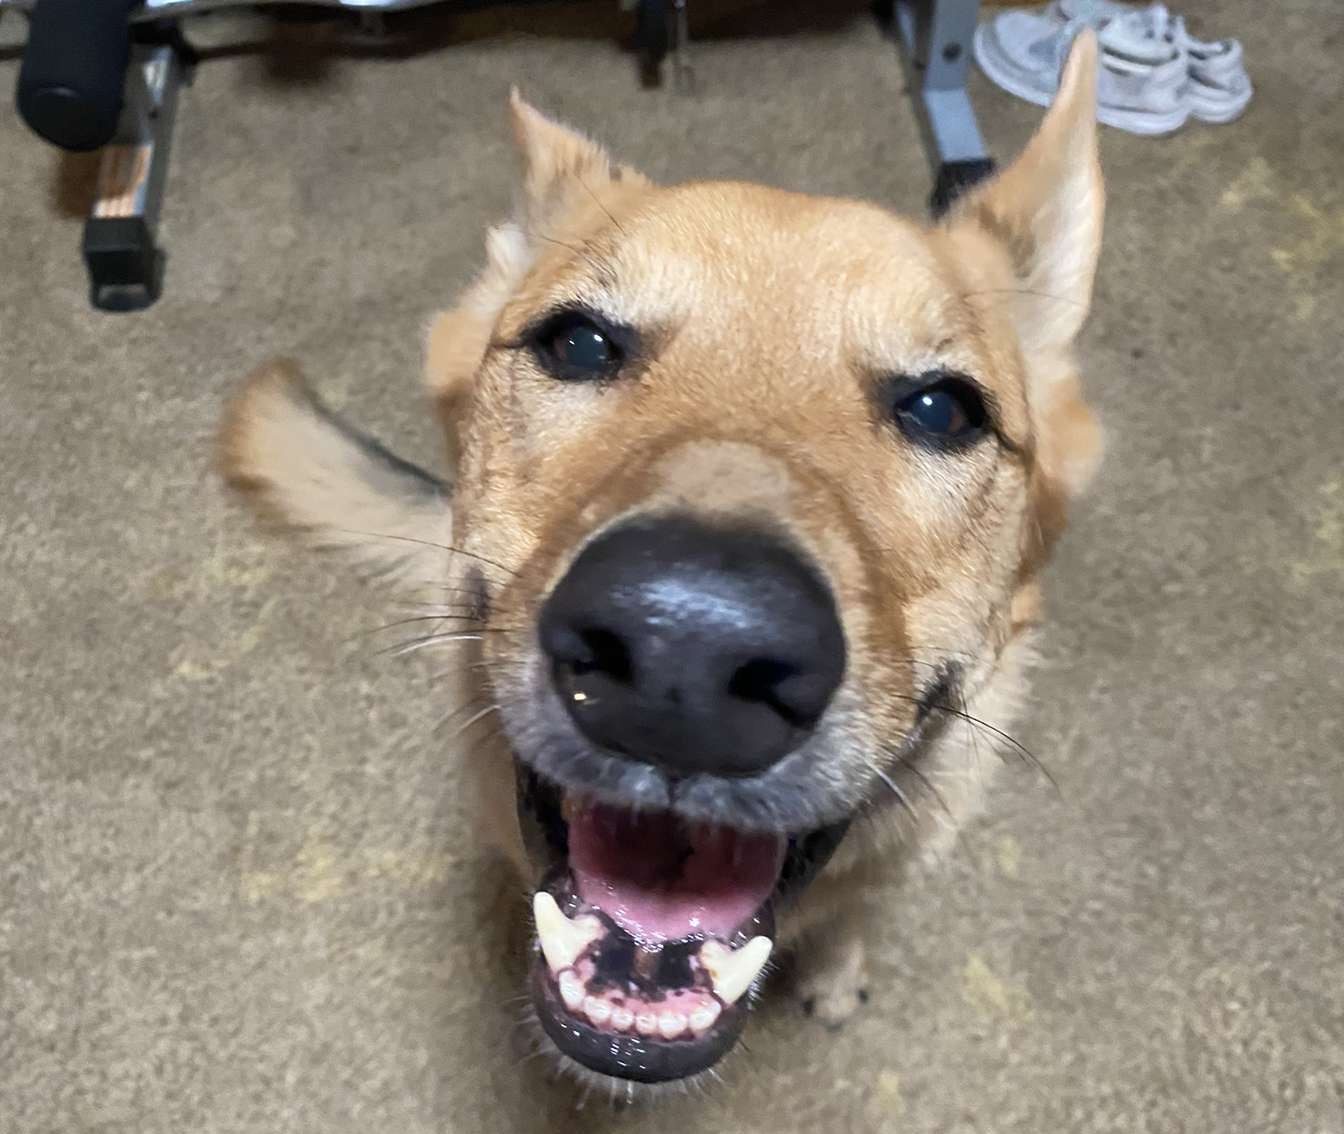 ROSCOE. James Englands German Shepherd smiles for the camera. Roscoe was named after the childhood dog of Englands mother. [His name] makes Roscoe seem more like his own individual and not just like everybody else,” England said. (Submitted Photo: James England)